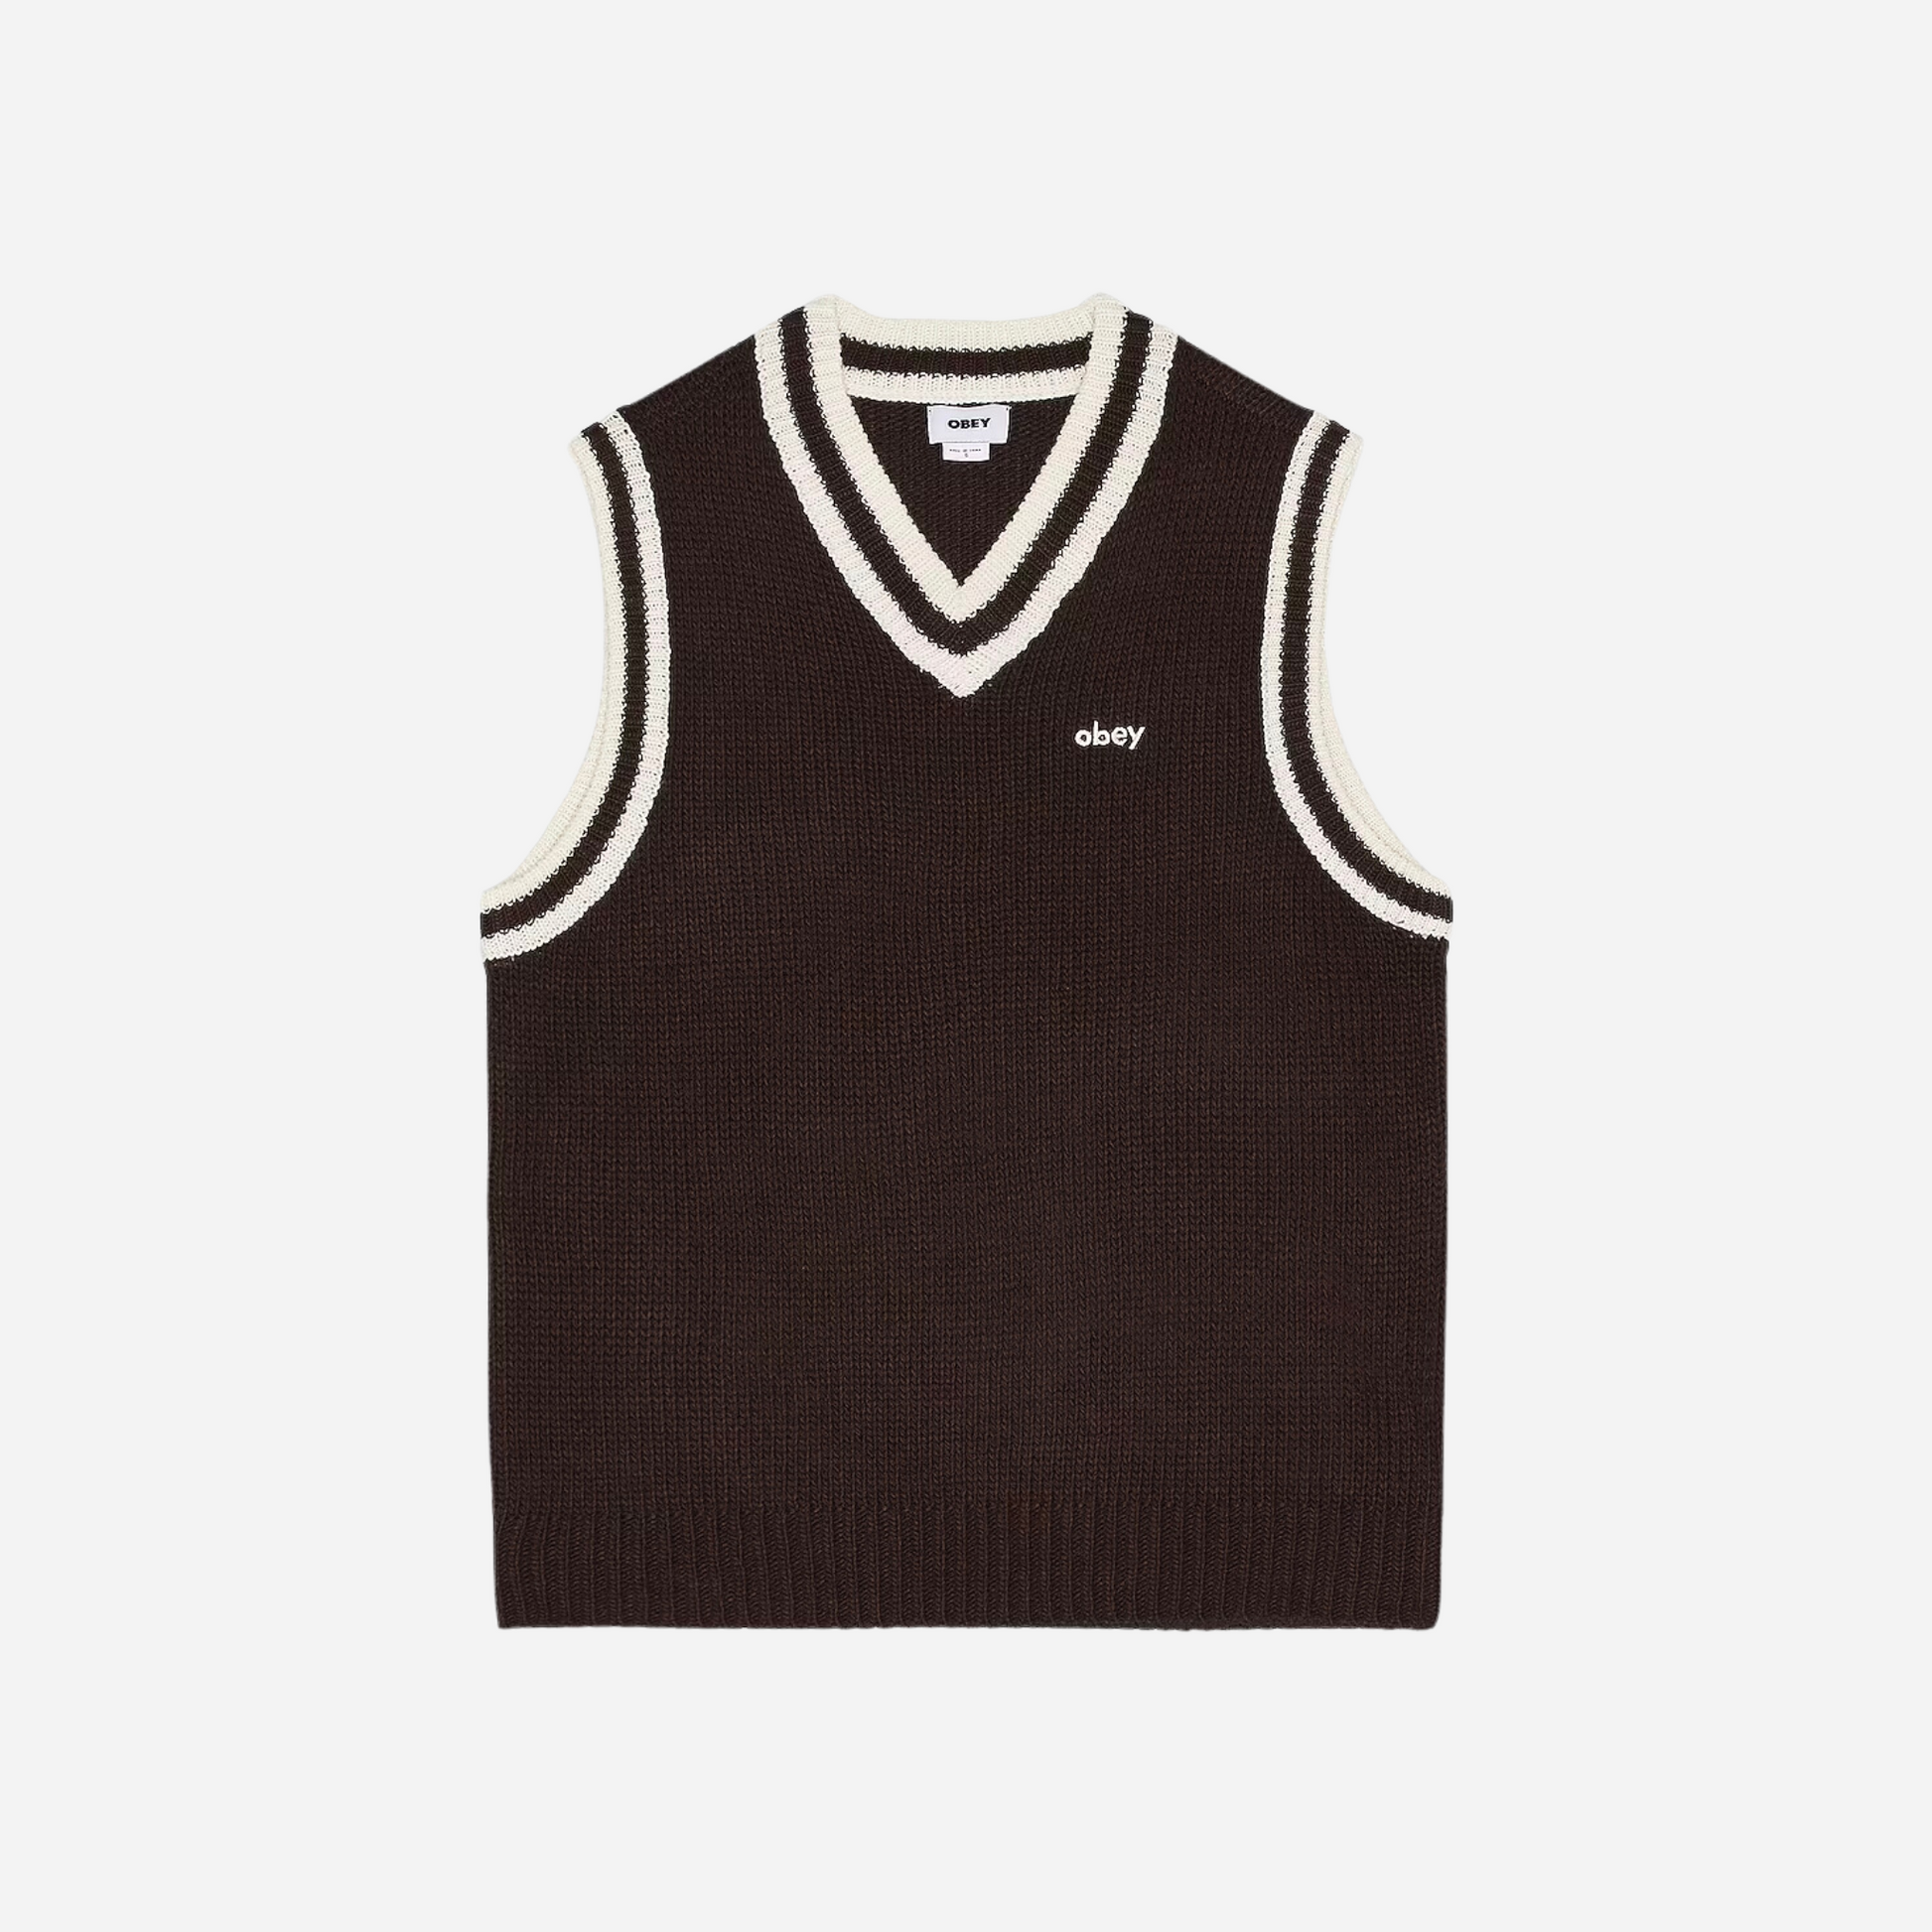 OBEY Alden Sweater Vest Brown - Hympala Store 